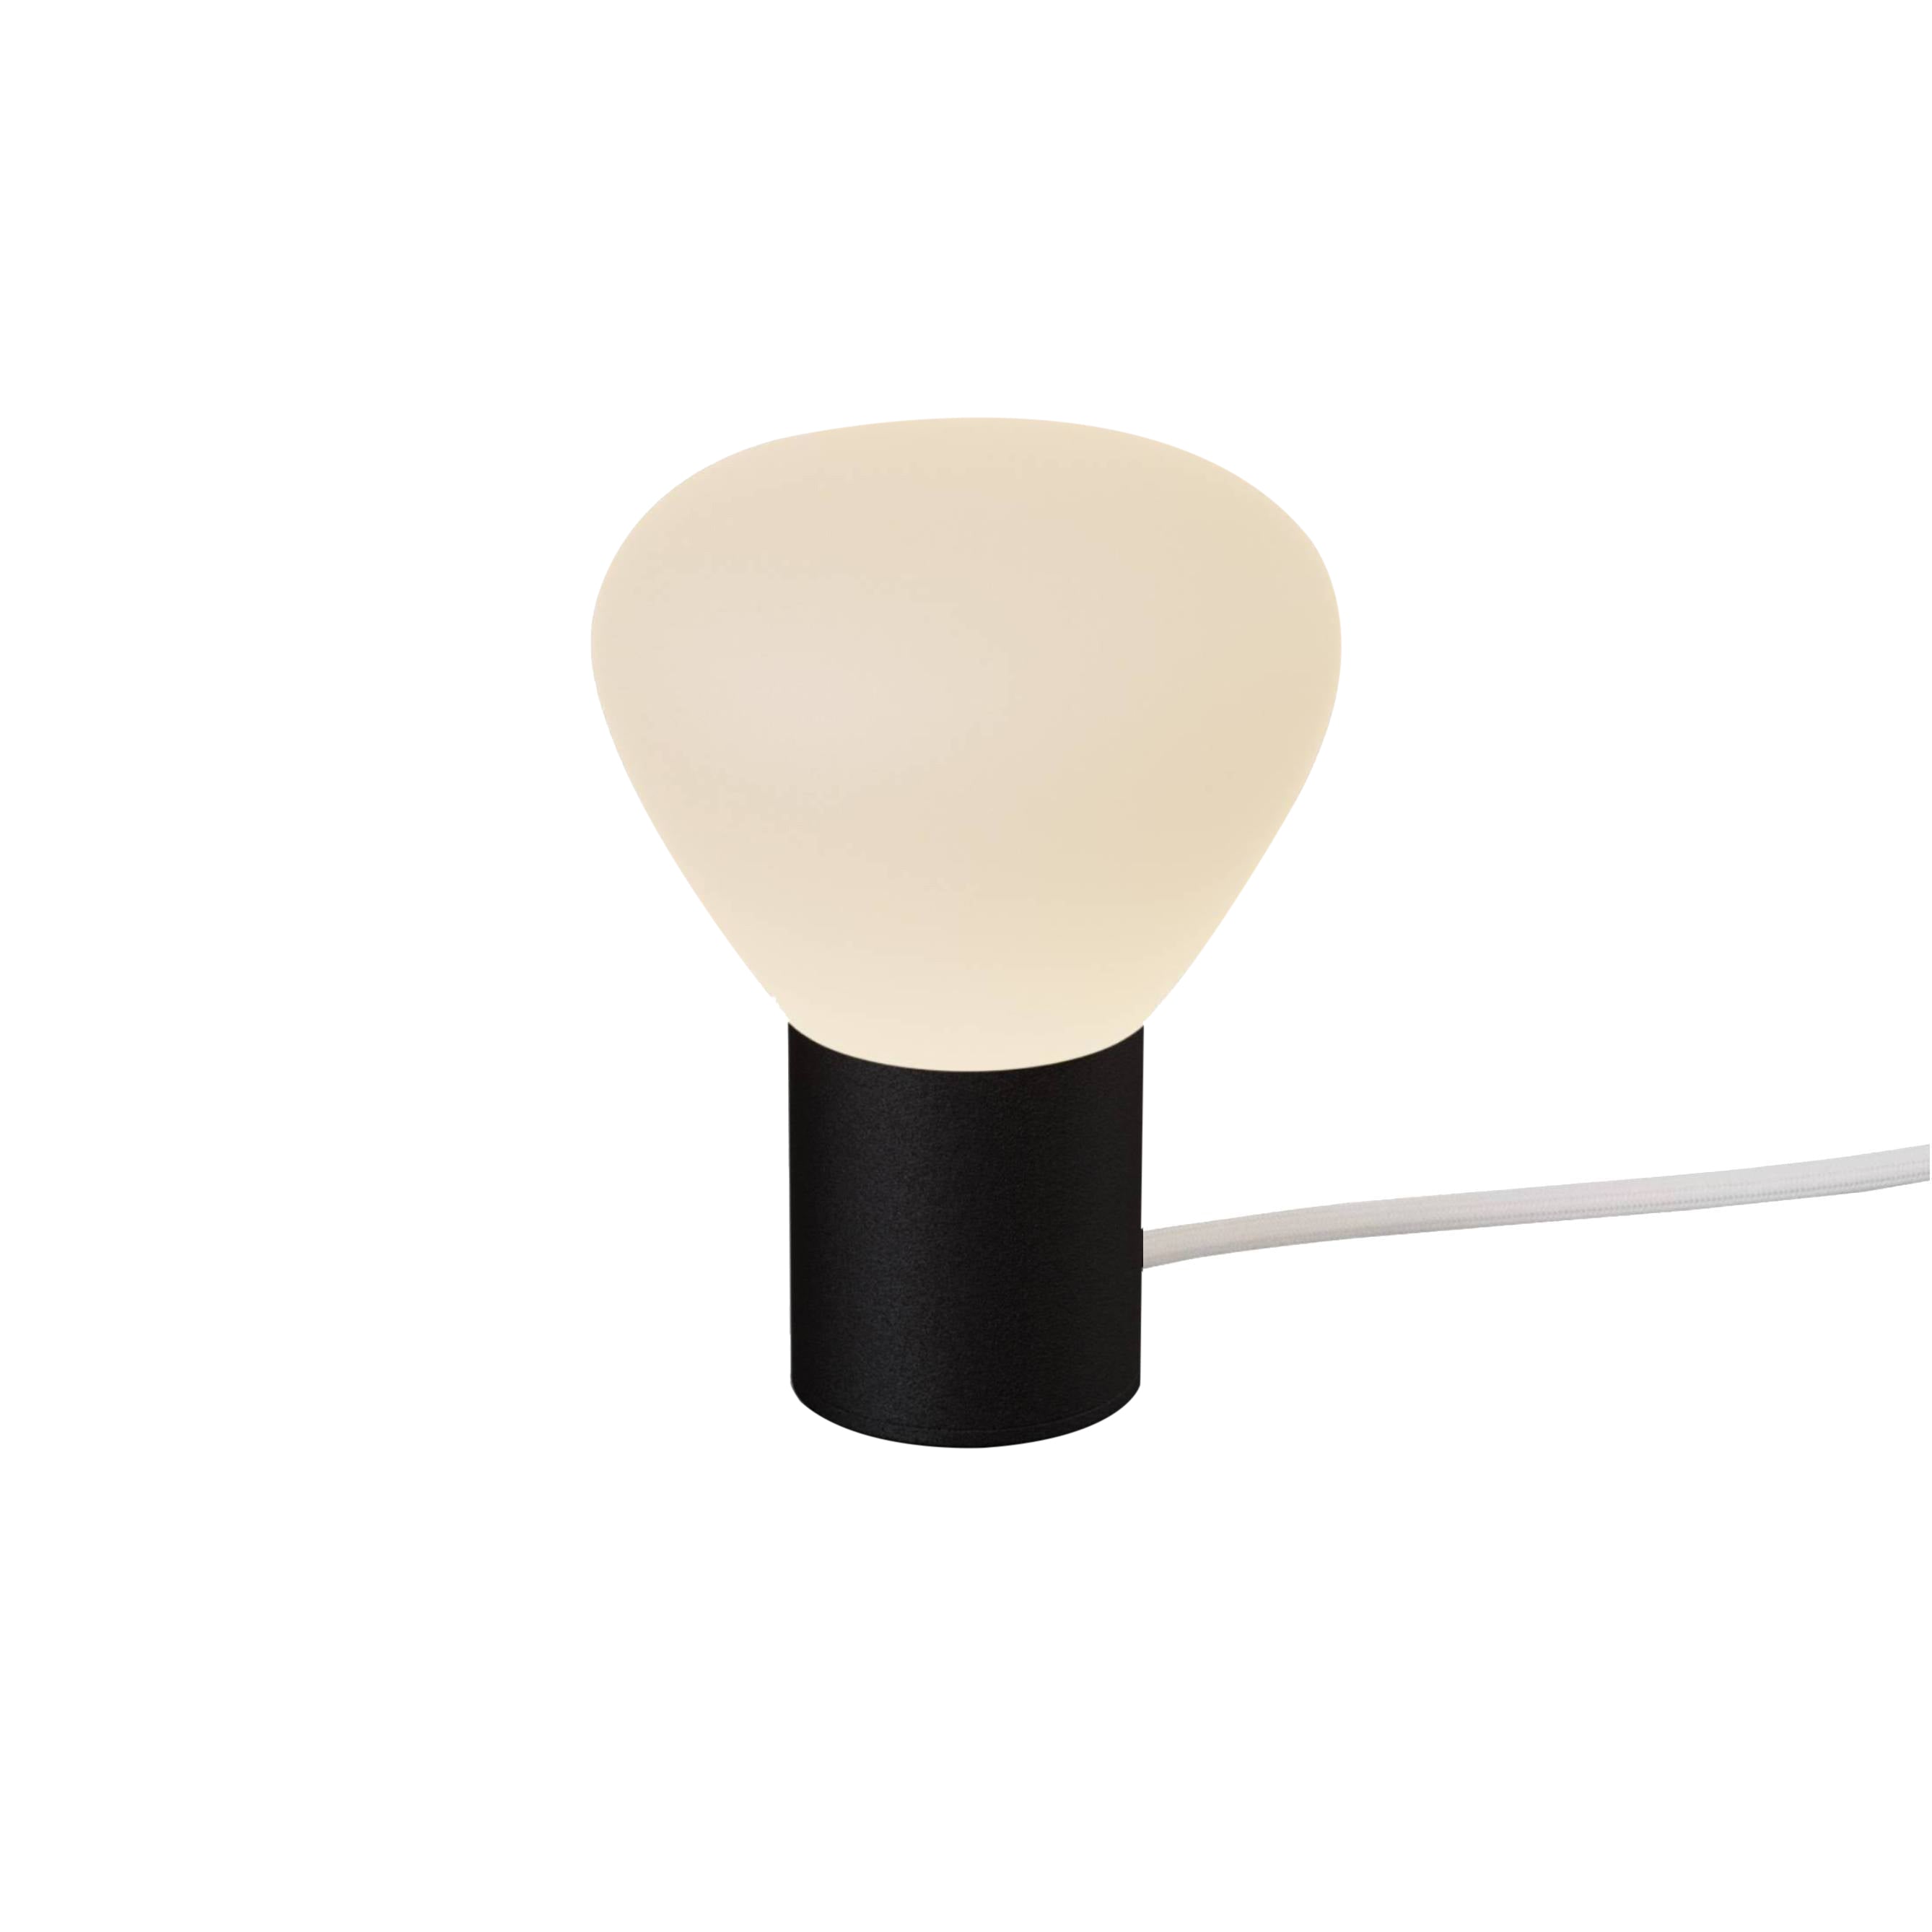 Parc 01 Table Lamp: Footswitch + Black + White